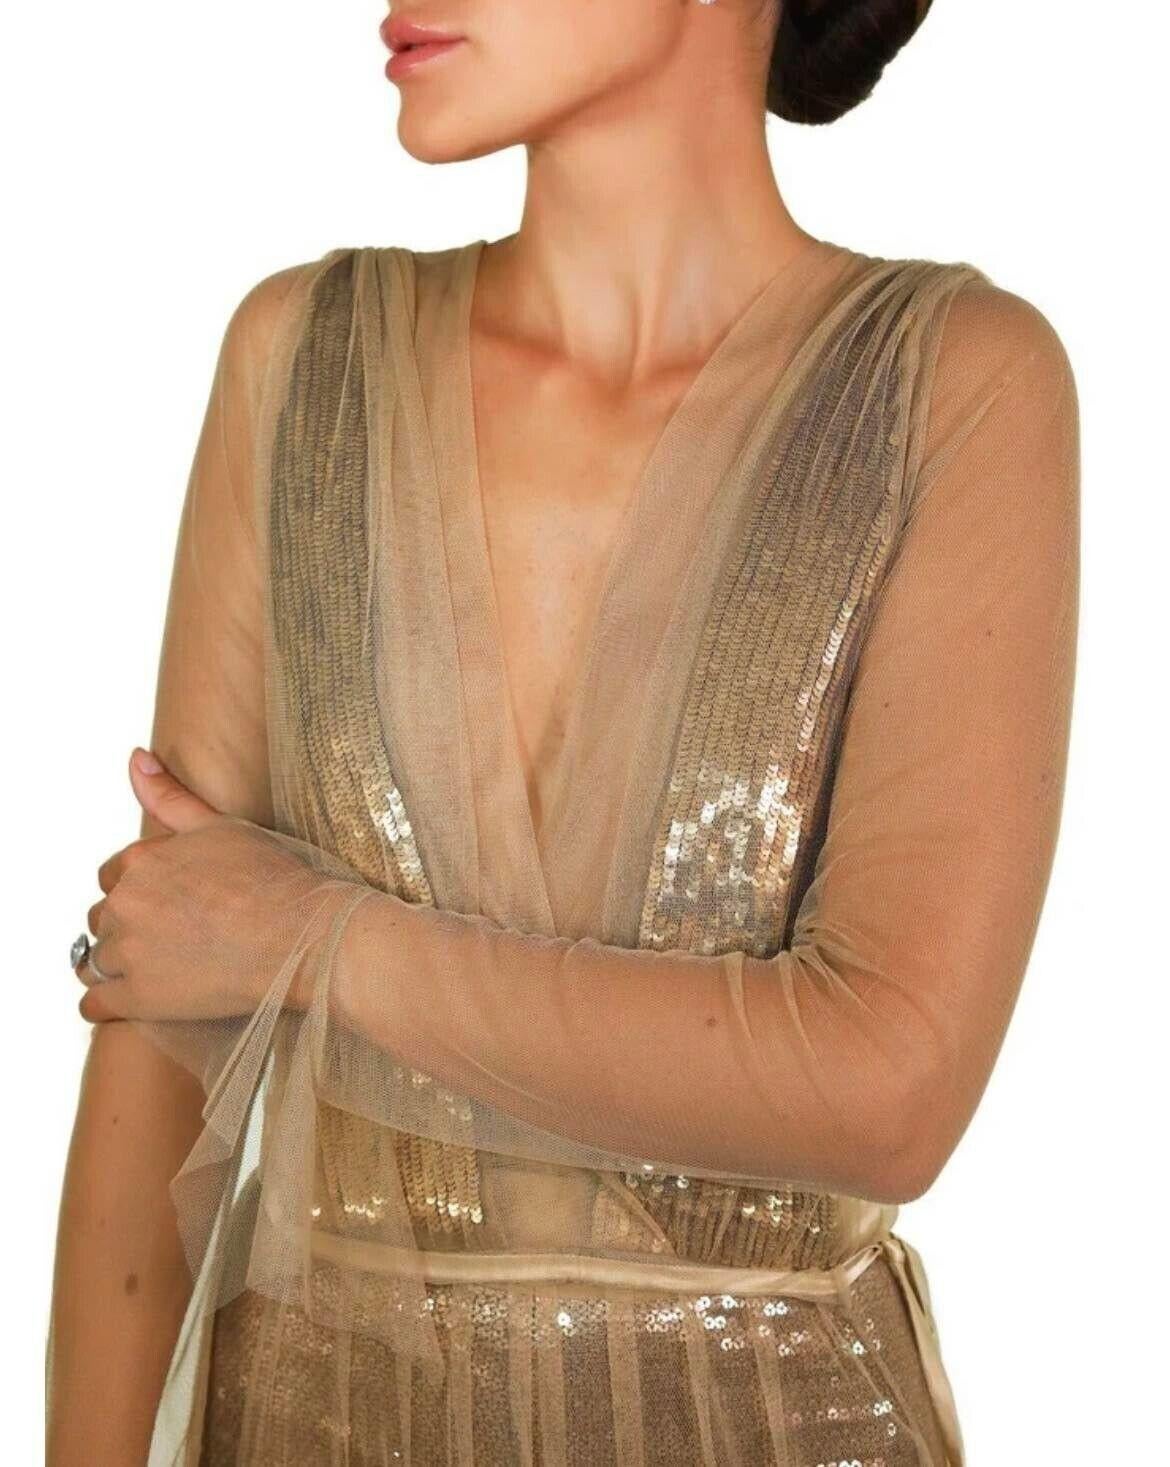 New Tom Ford Nude Embellished Chiffon Dress w/ Gold Sequin Pants 38 - 2 For Sale 5